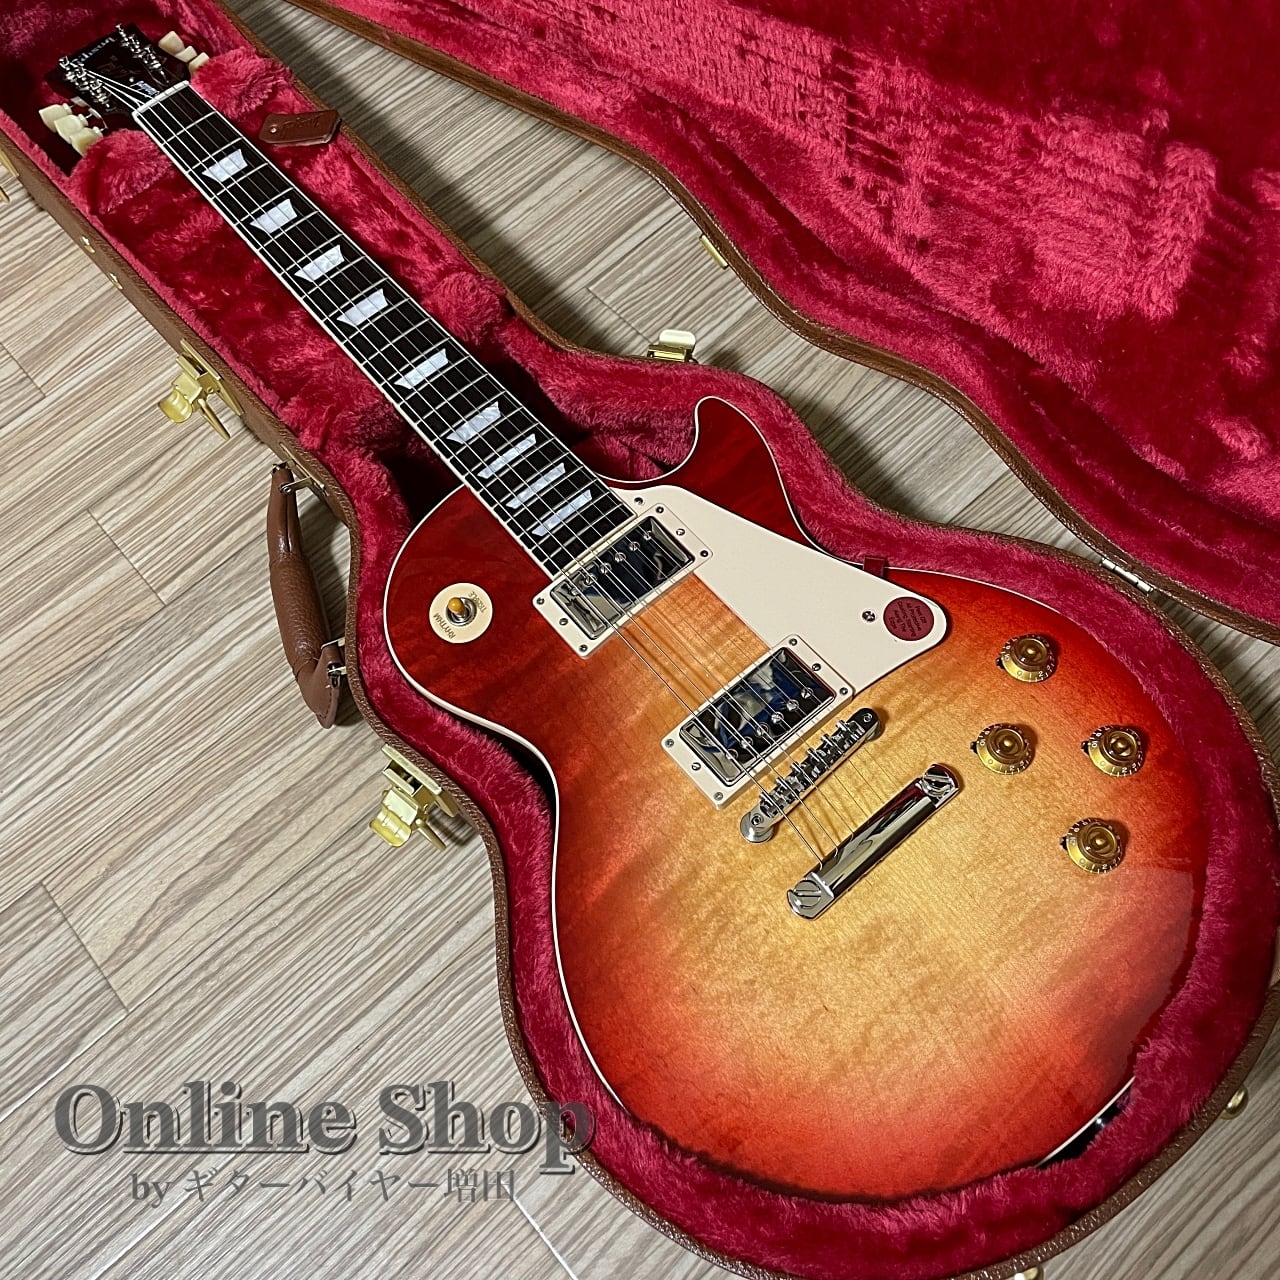 Gibson   Online Shop by ギターバイヤー増田